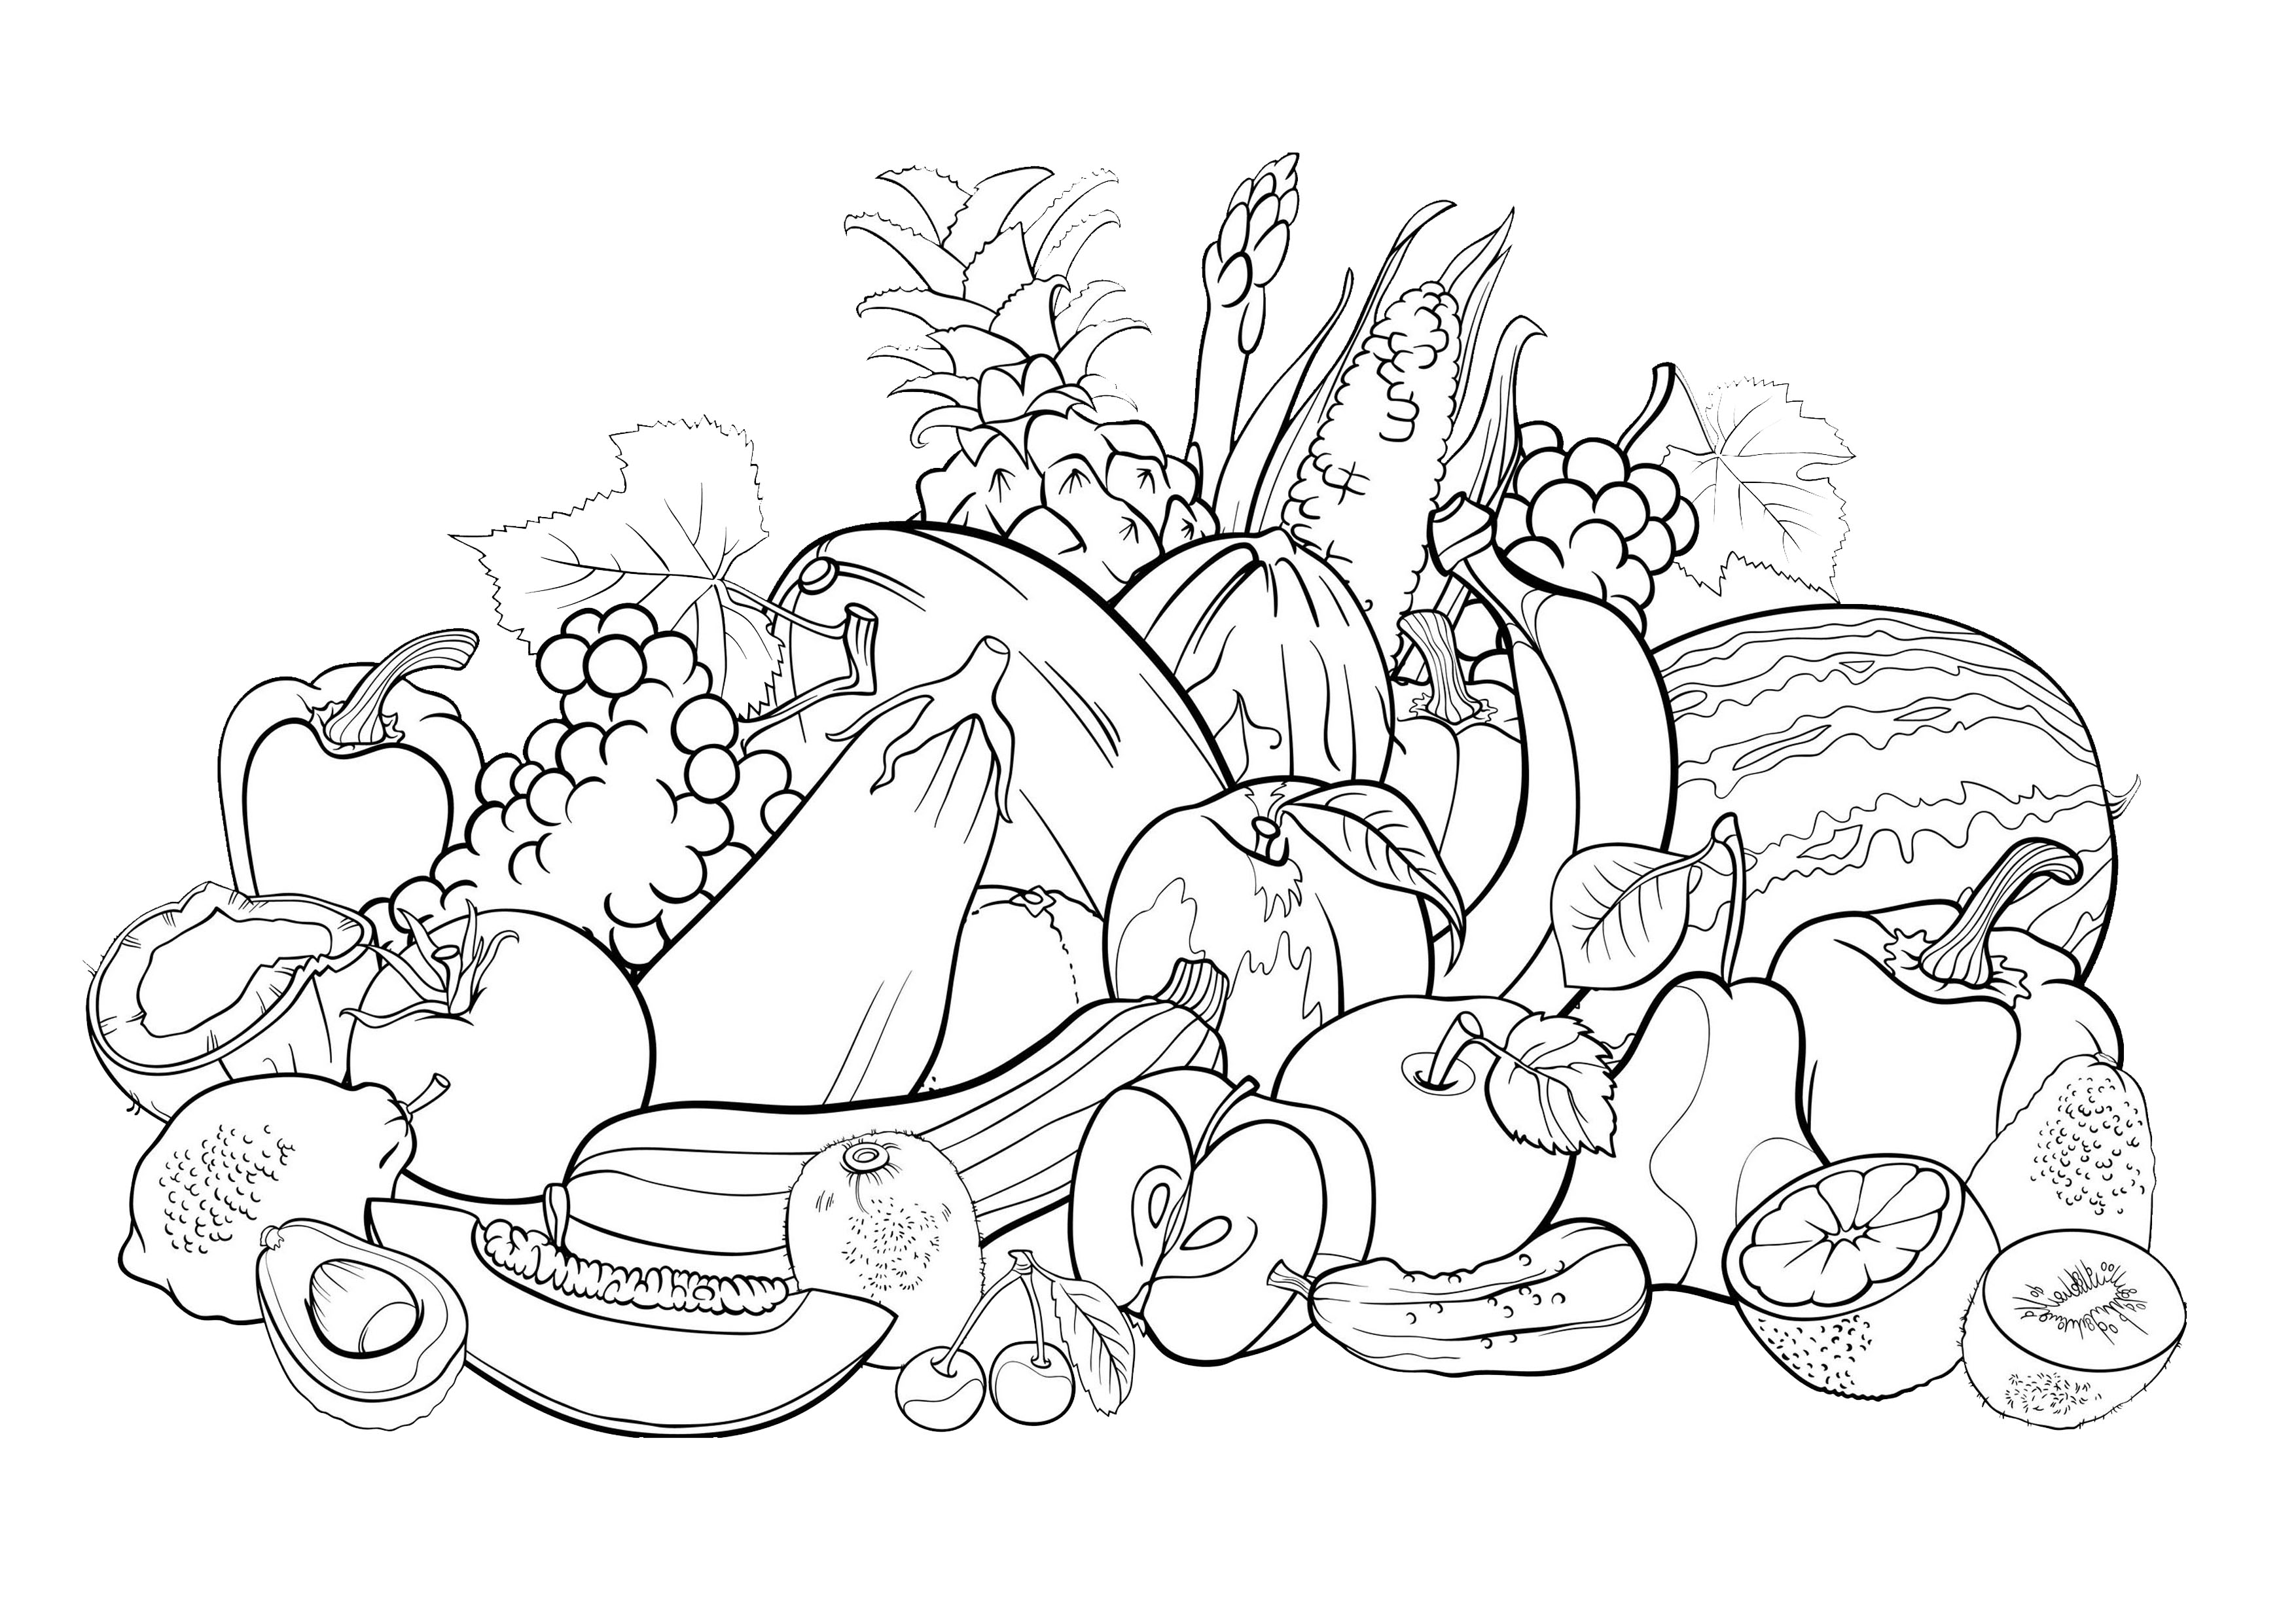 Fruit salad - Flowers Adult Coloring Pages